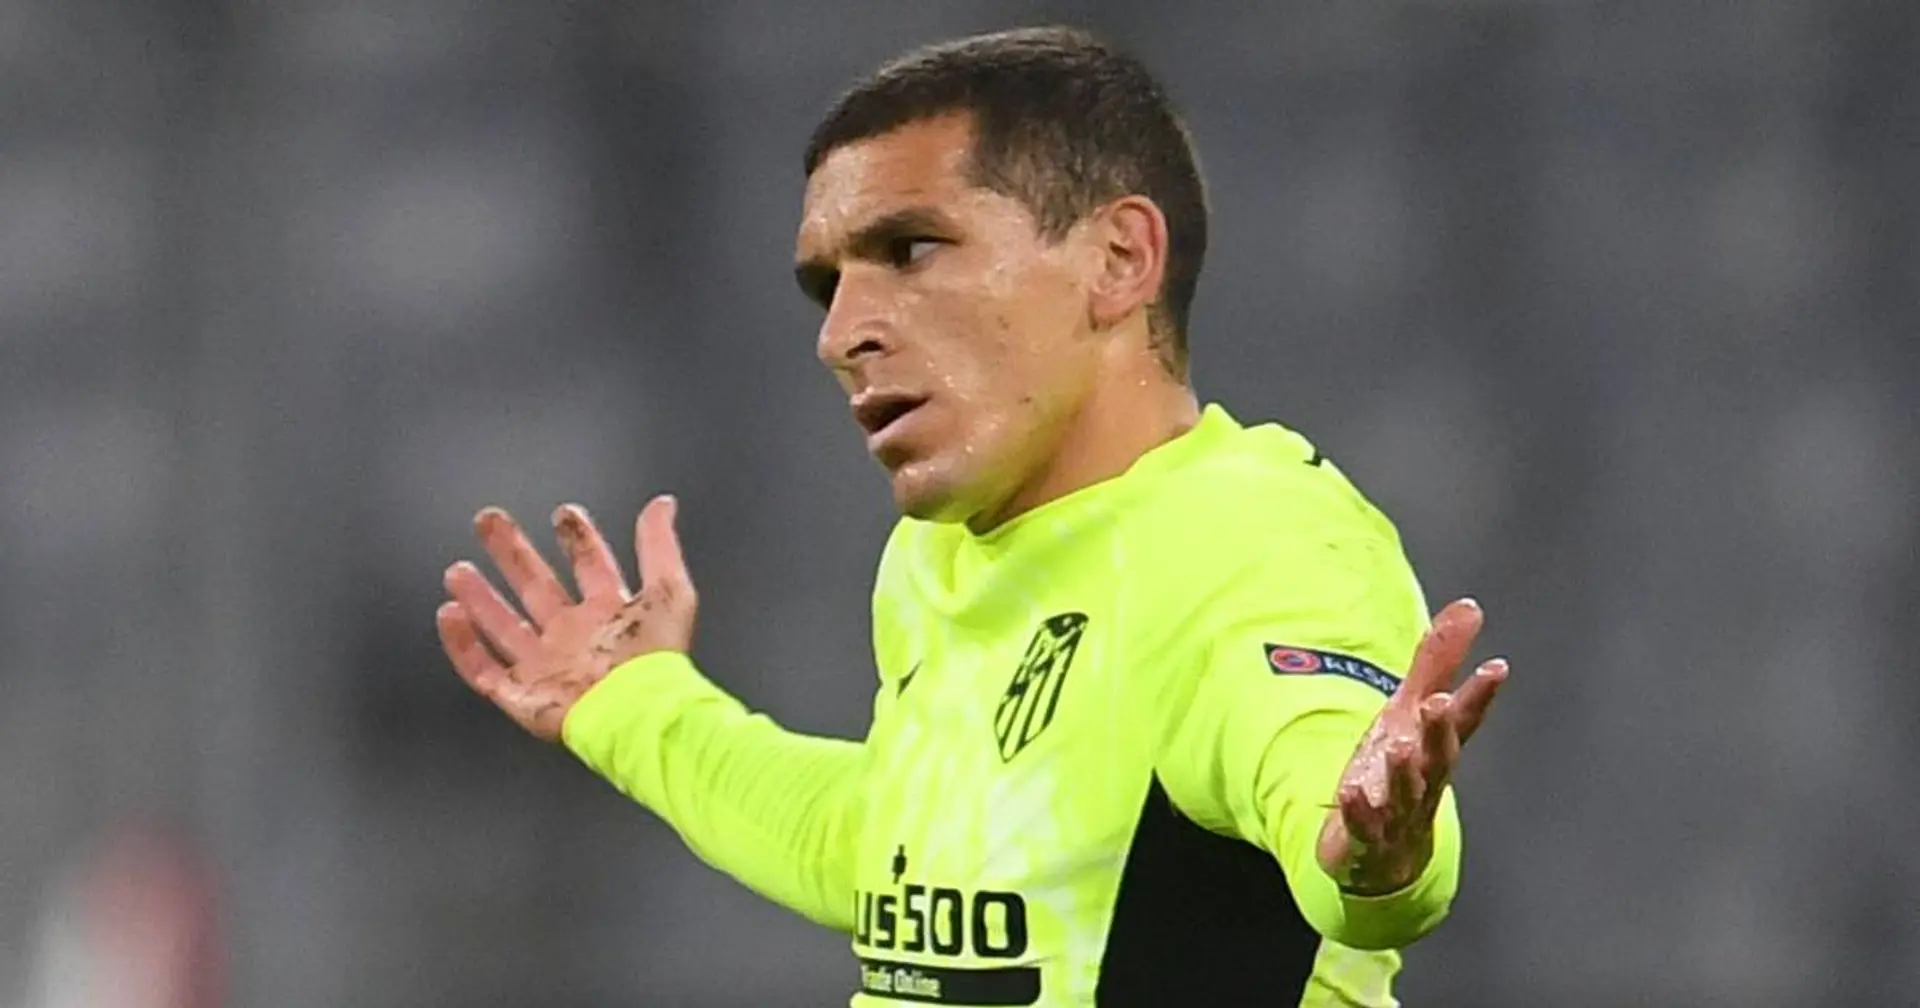 Arsenal ready to cut Torreira's loan short amid interest from Italian clubs (3 stars)